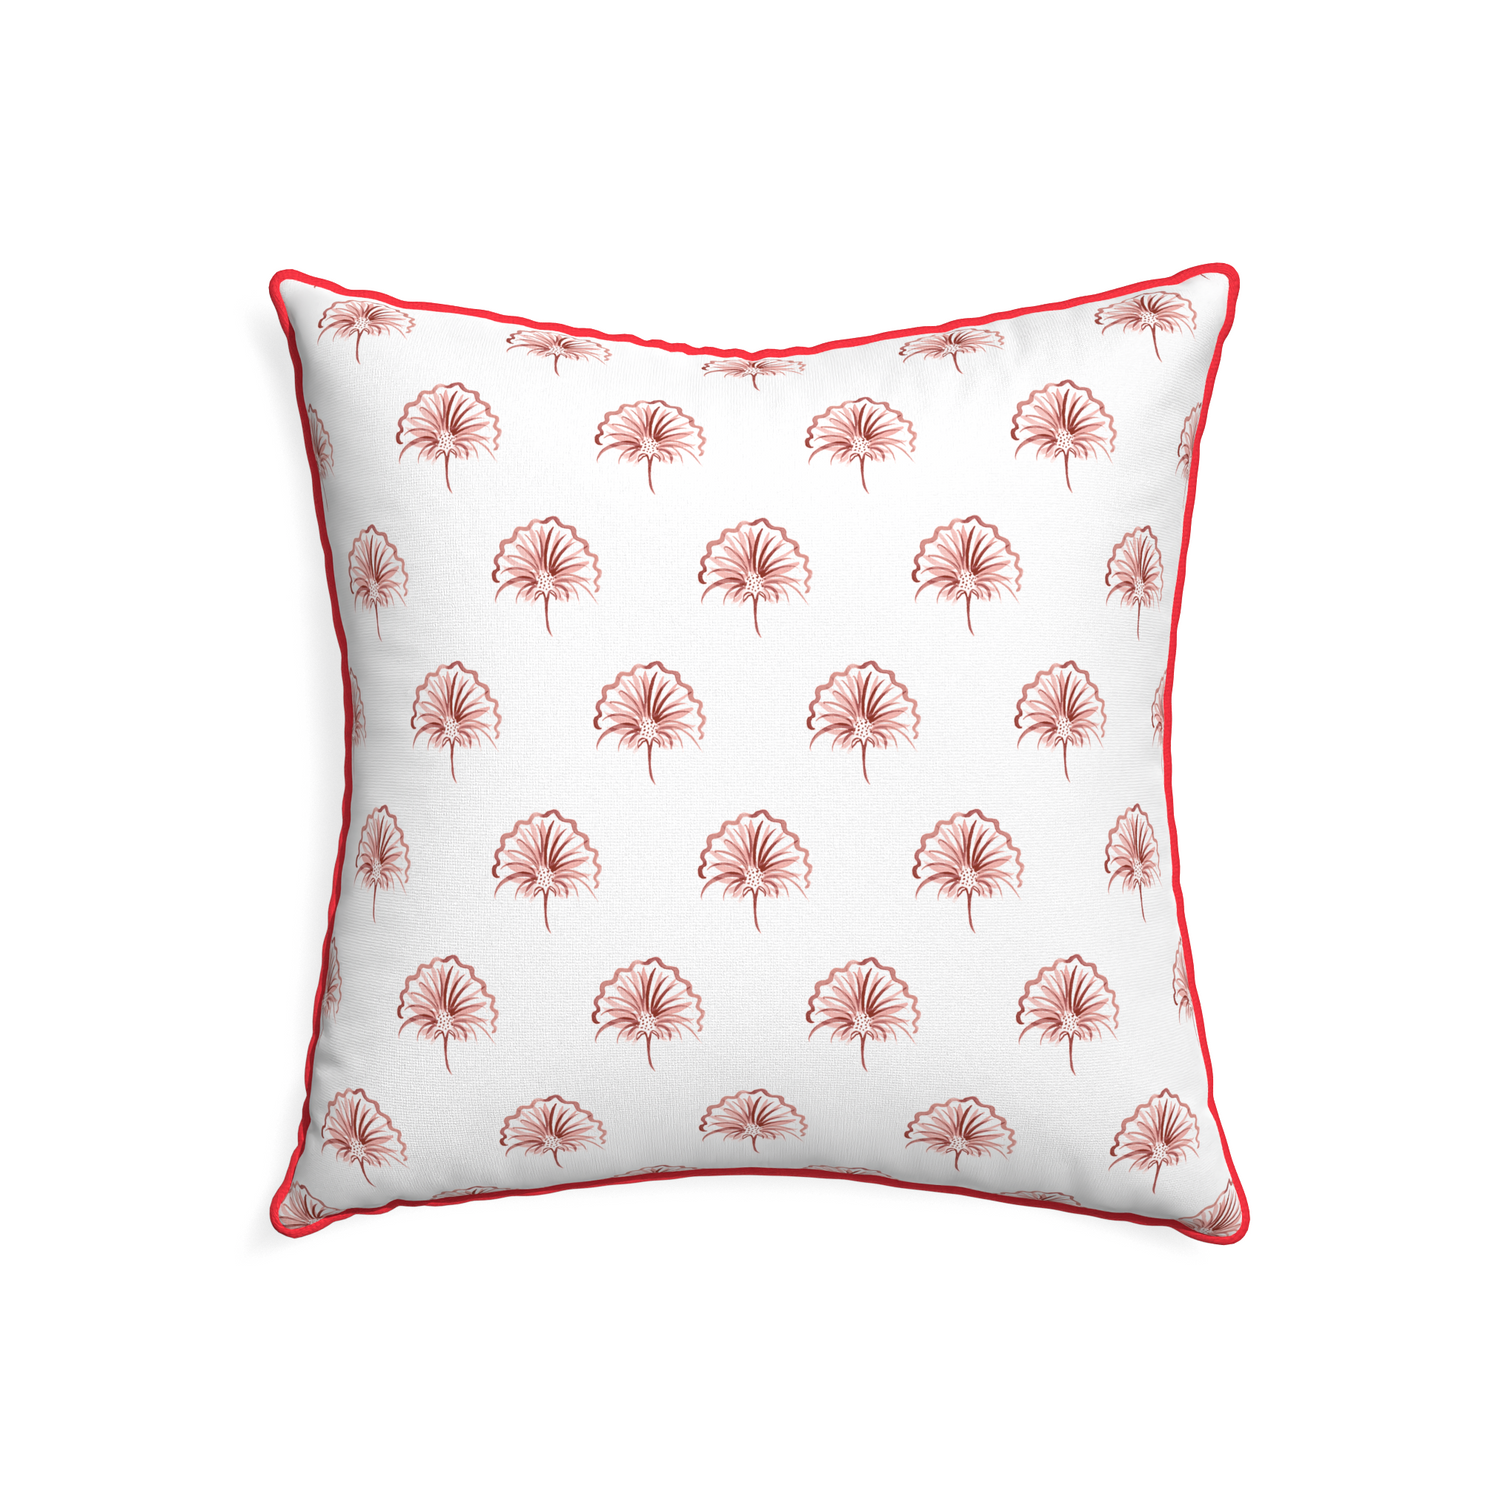 22-square penelope rose custom floral pinkpillow with cherry piping on white background